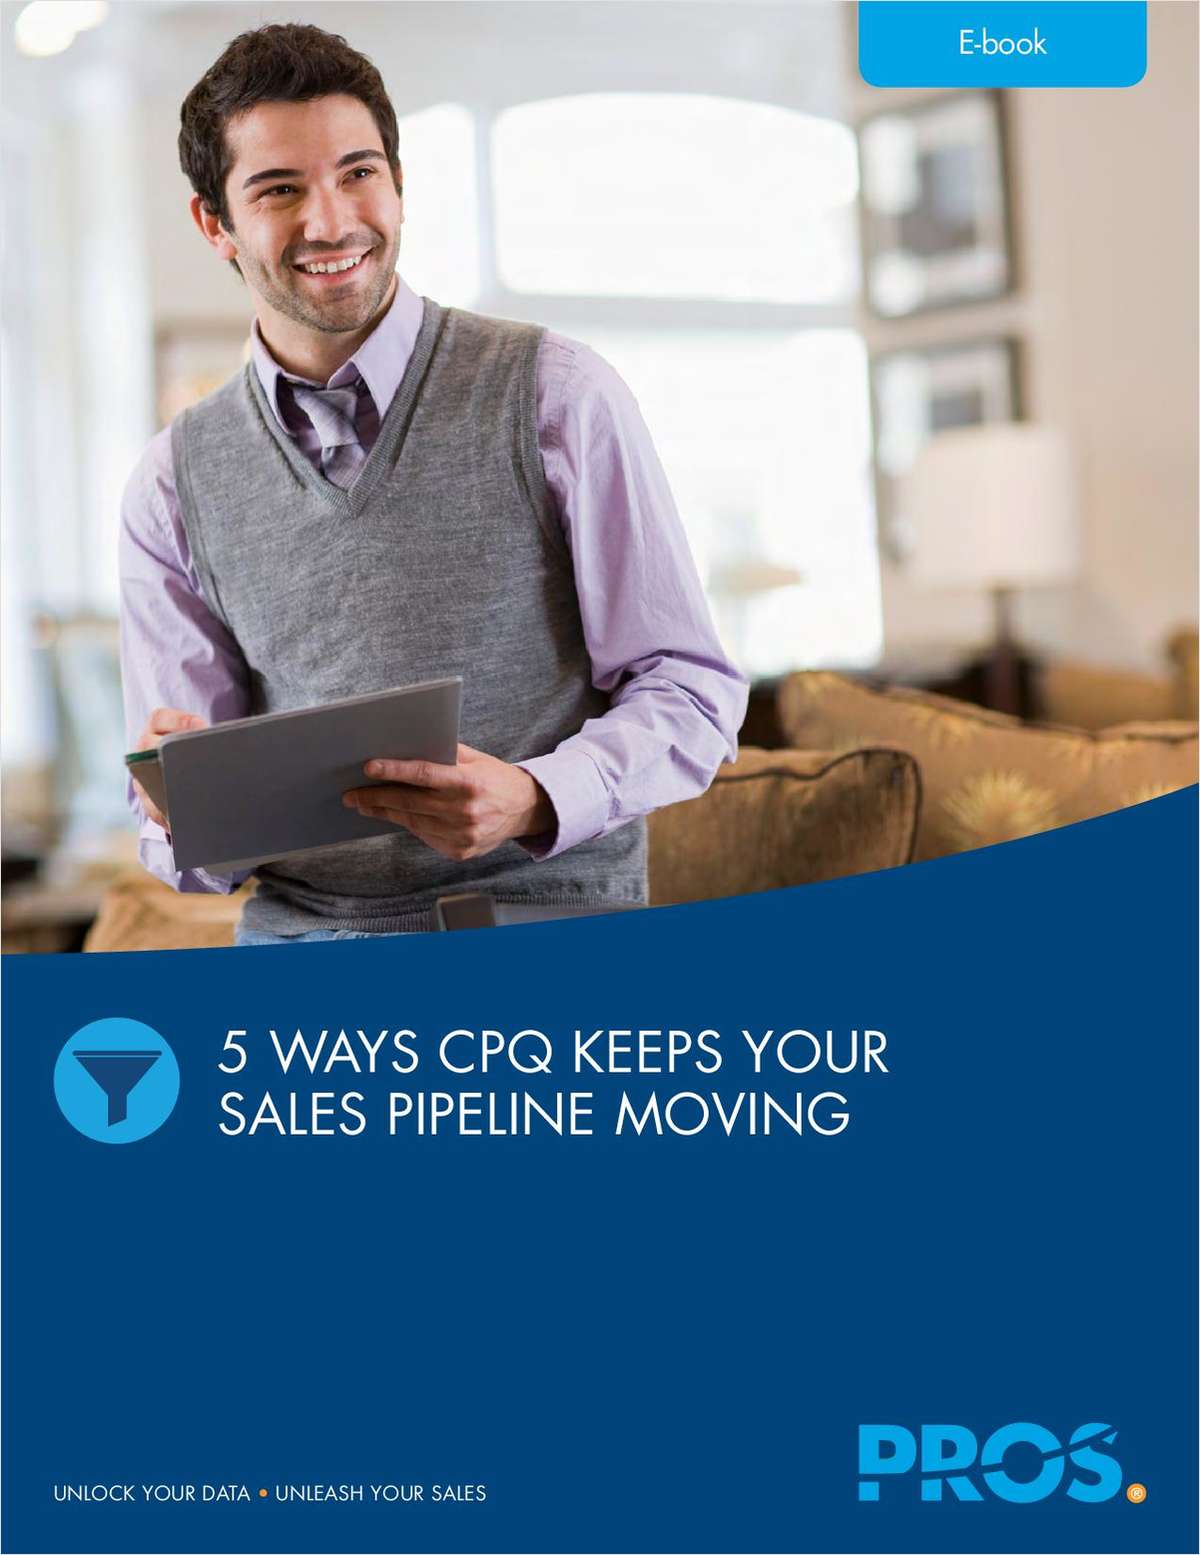 5 Ways CPQ Keeps Your Sales Pipeline Moving